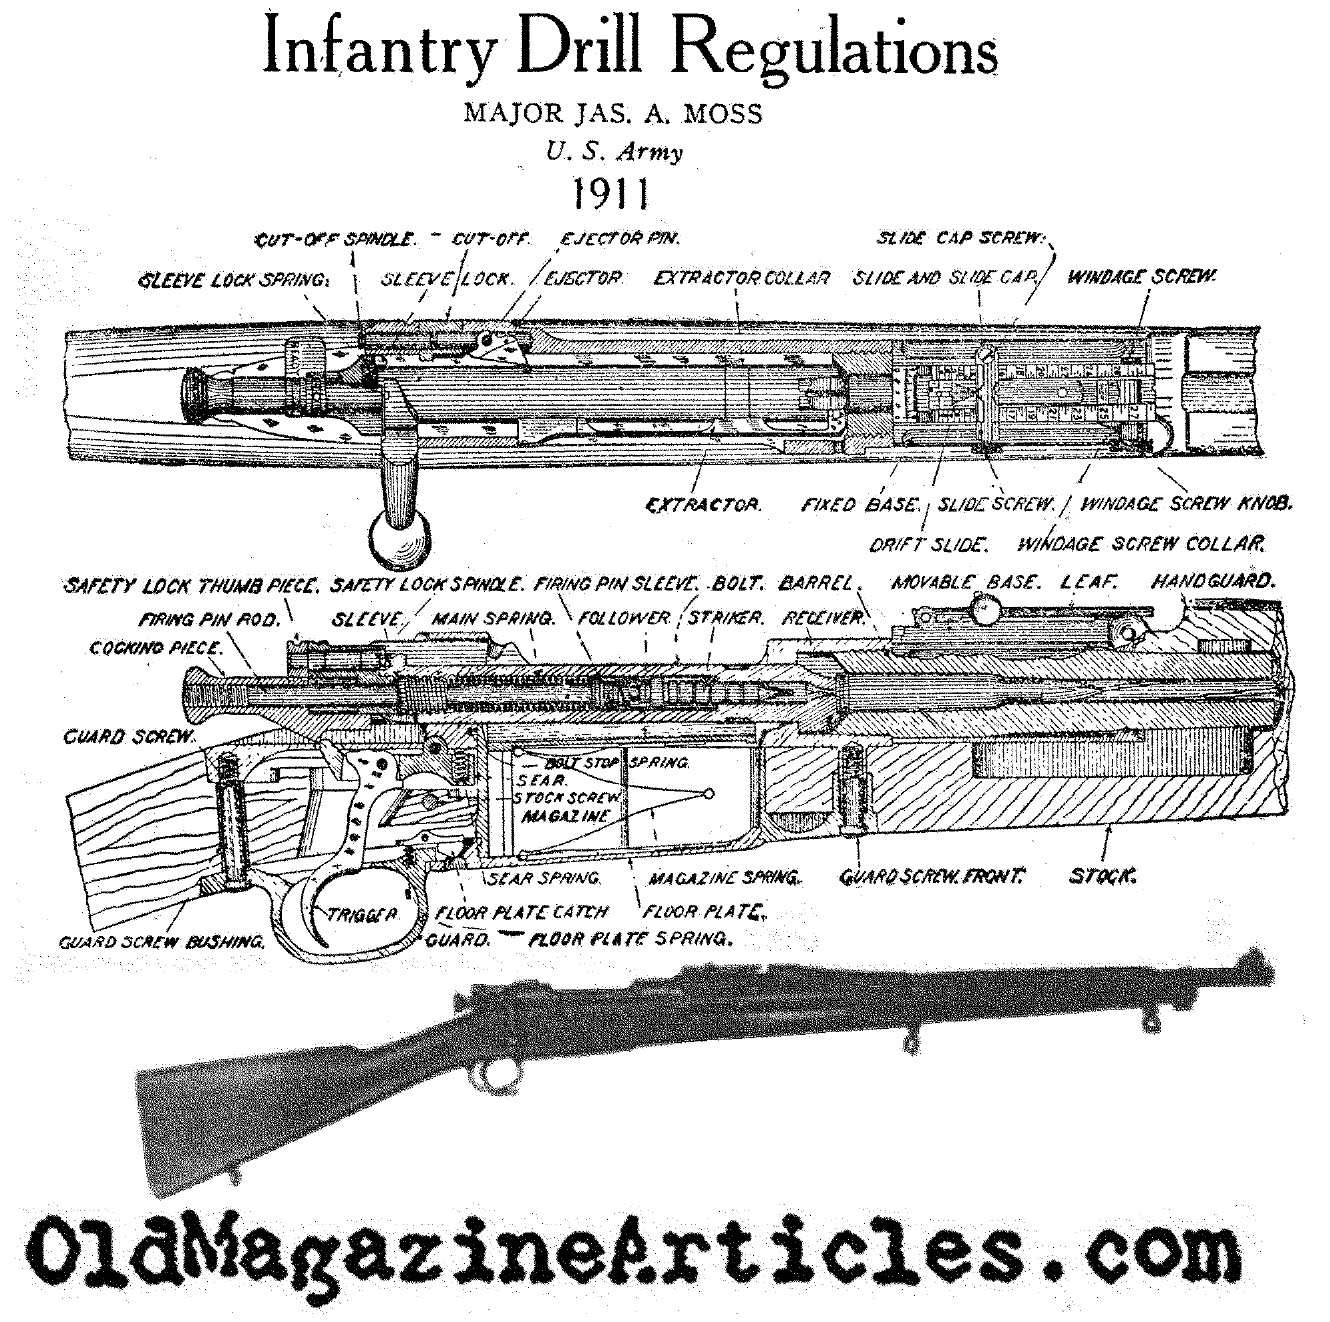 The American Springfield '03 Rifle (U.S. Infantry Drill Manual, 1911)